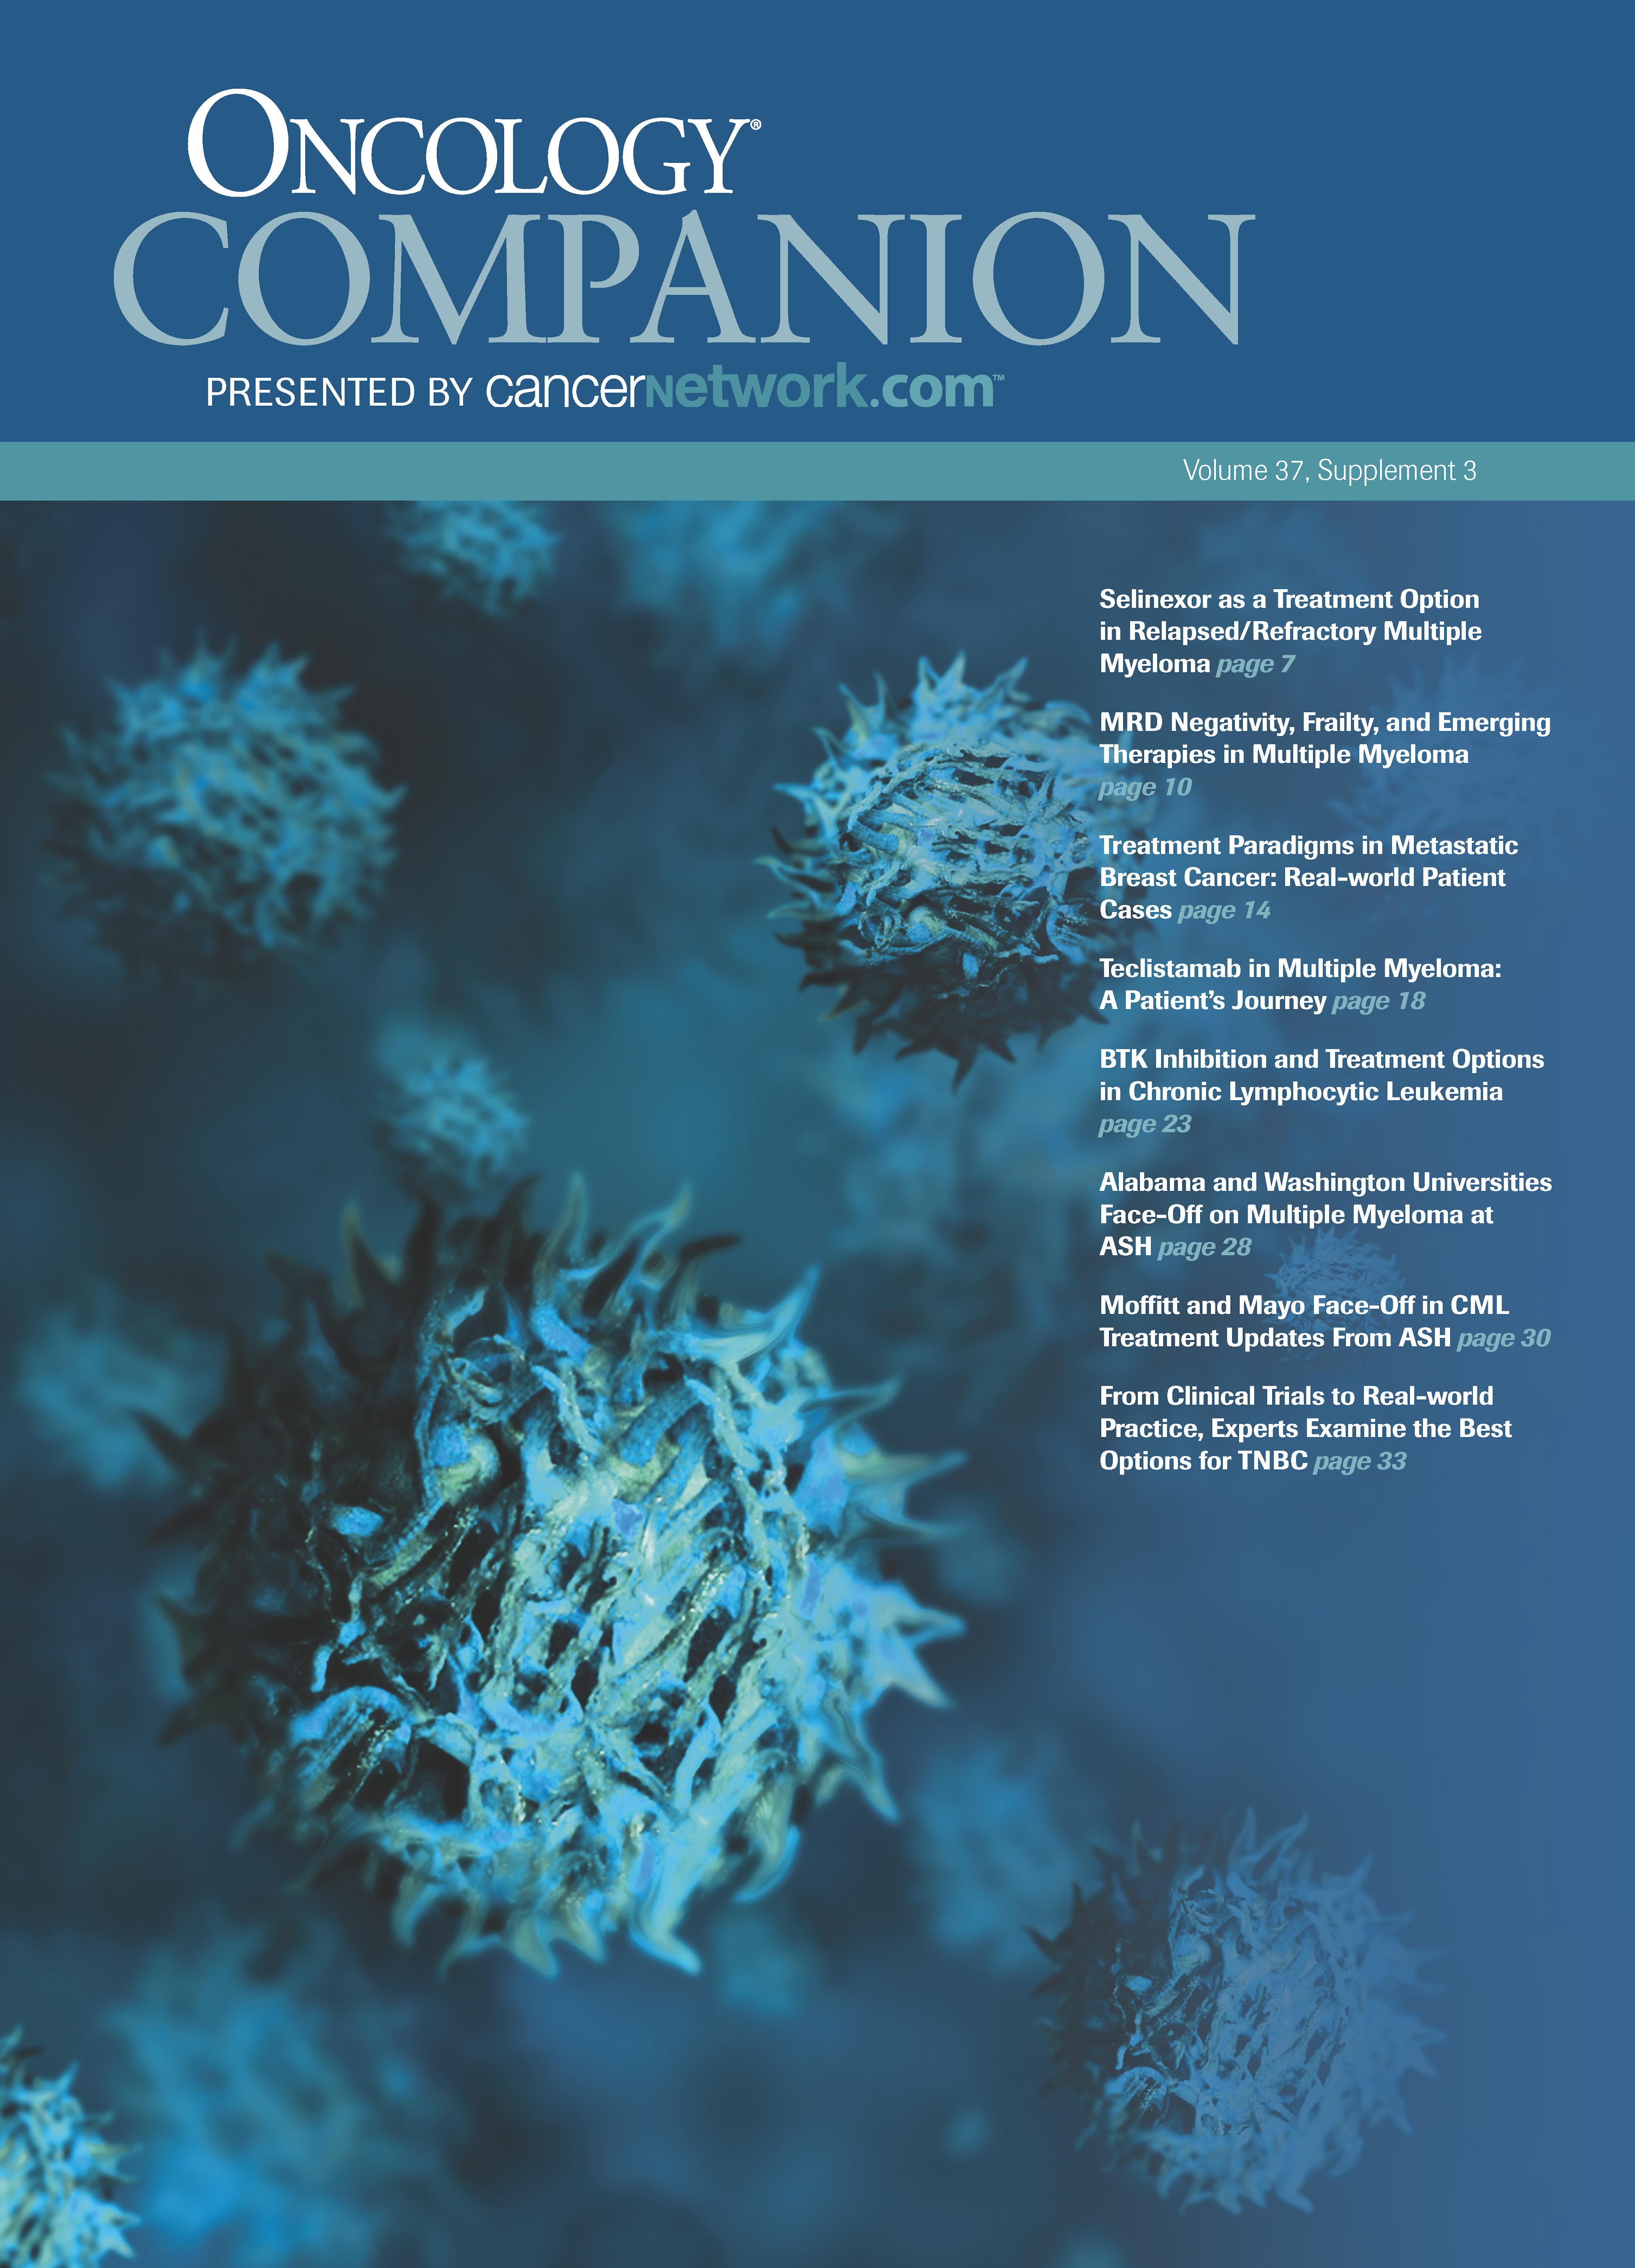 ONCOLOGY® Companion, Volume 37, Supplement 3